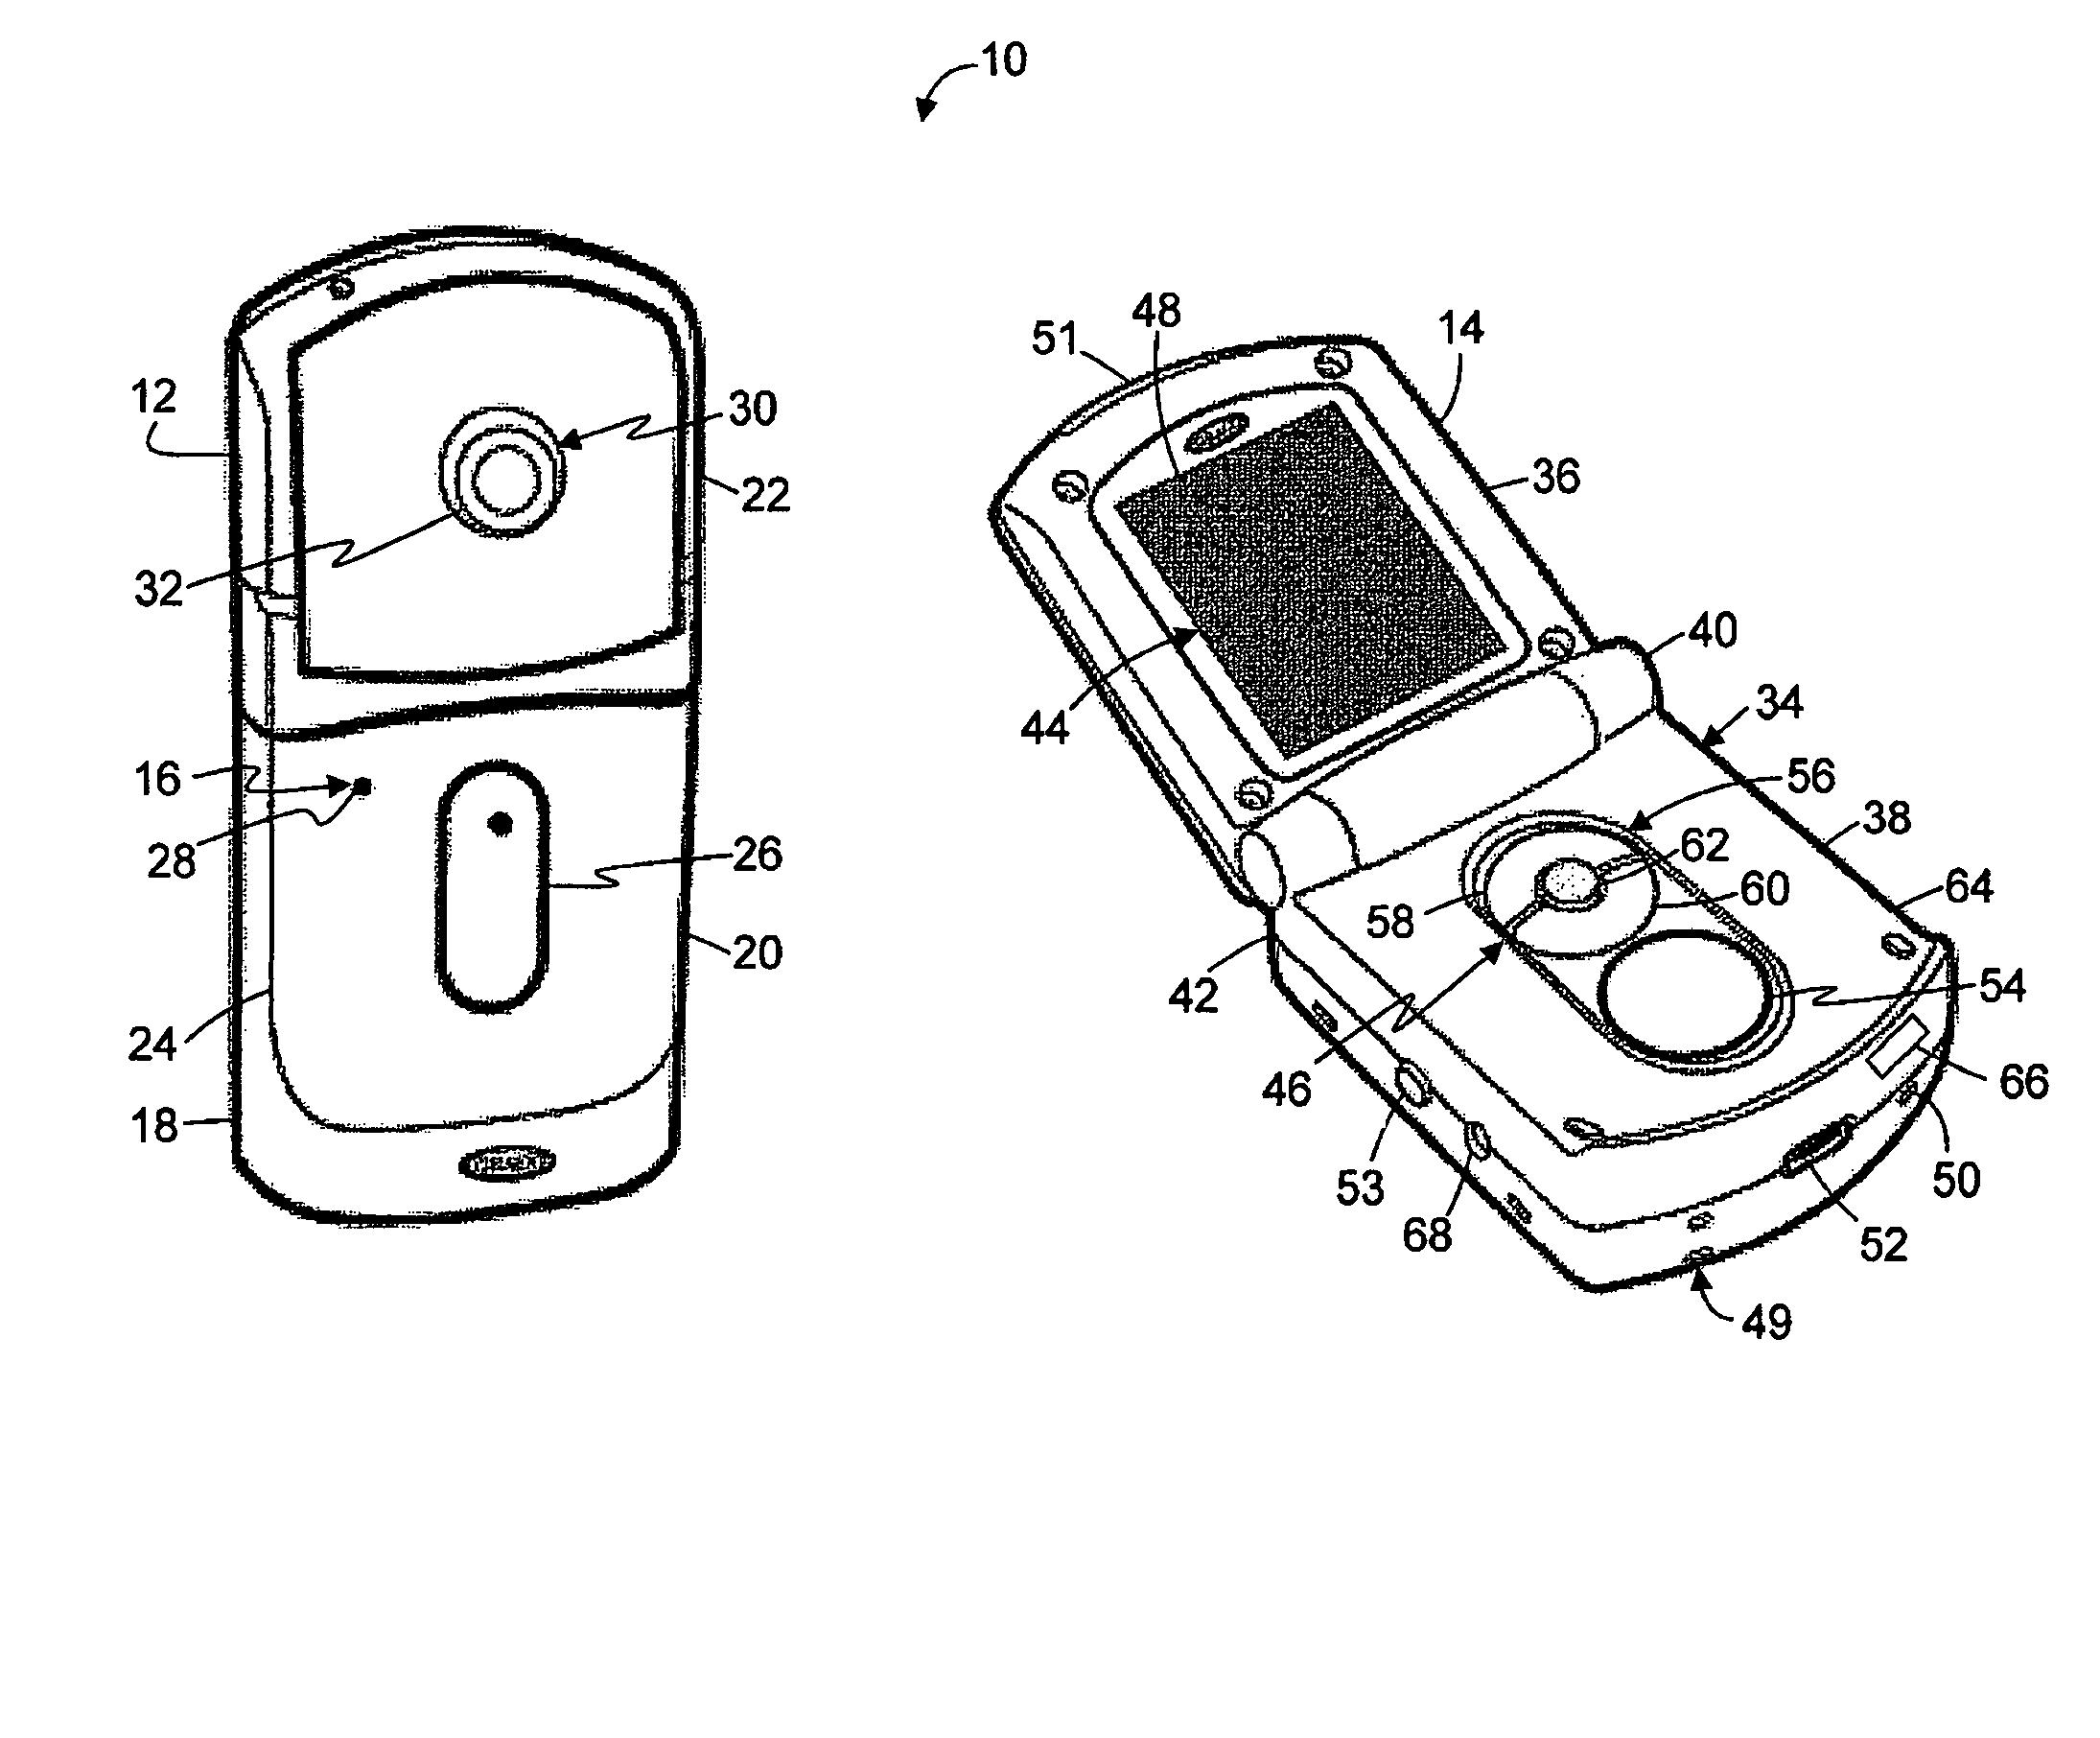 Child monitor system with content data storage